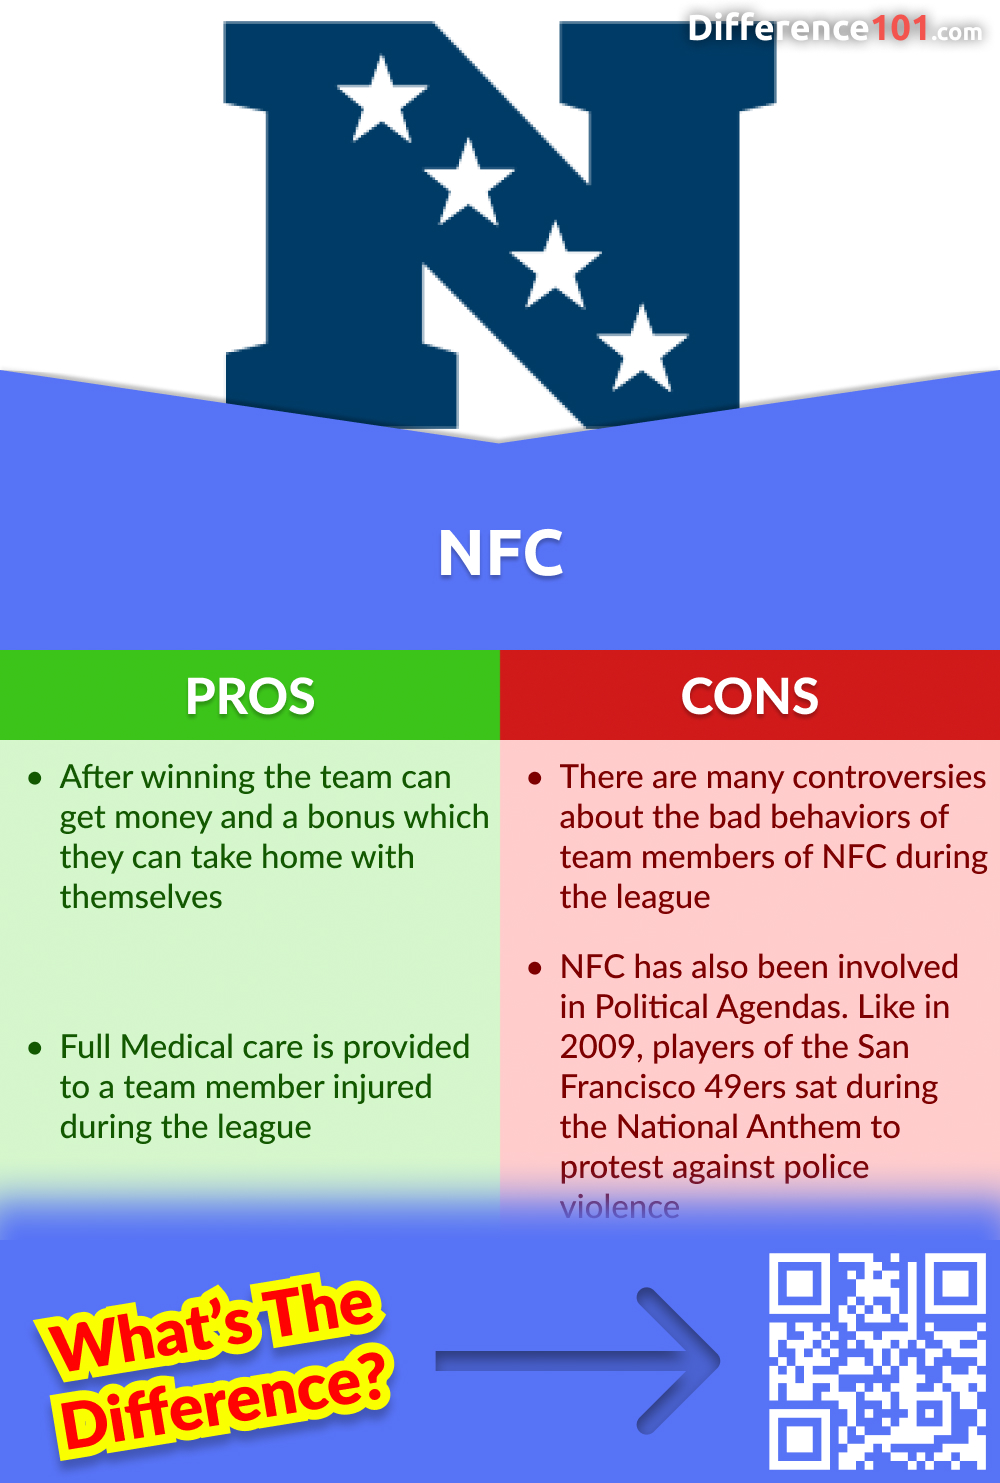 Pros and Cons of NFC